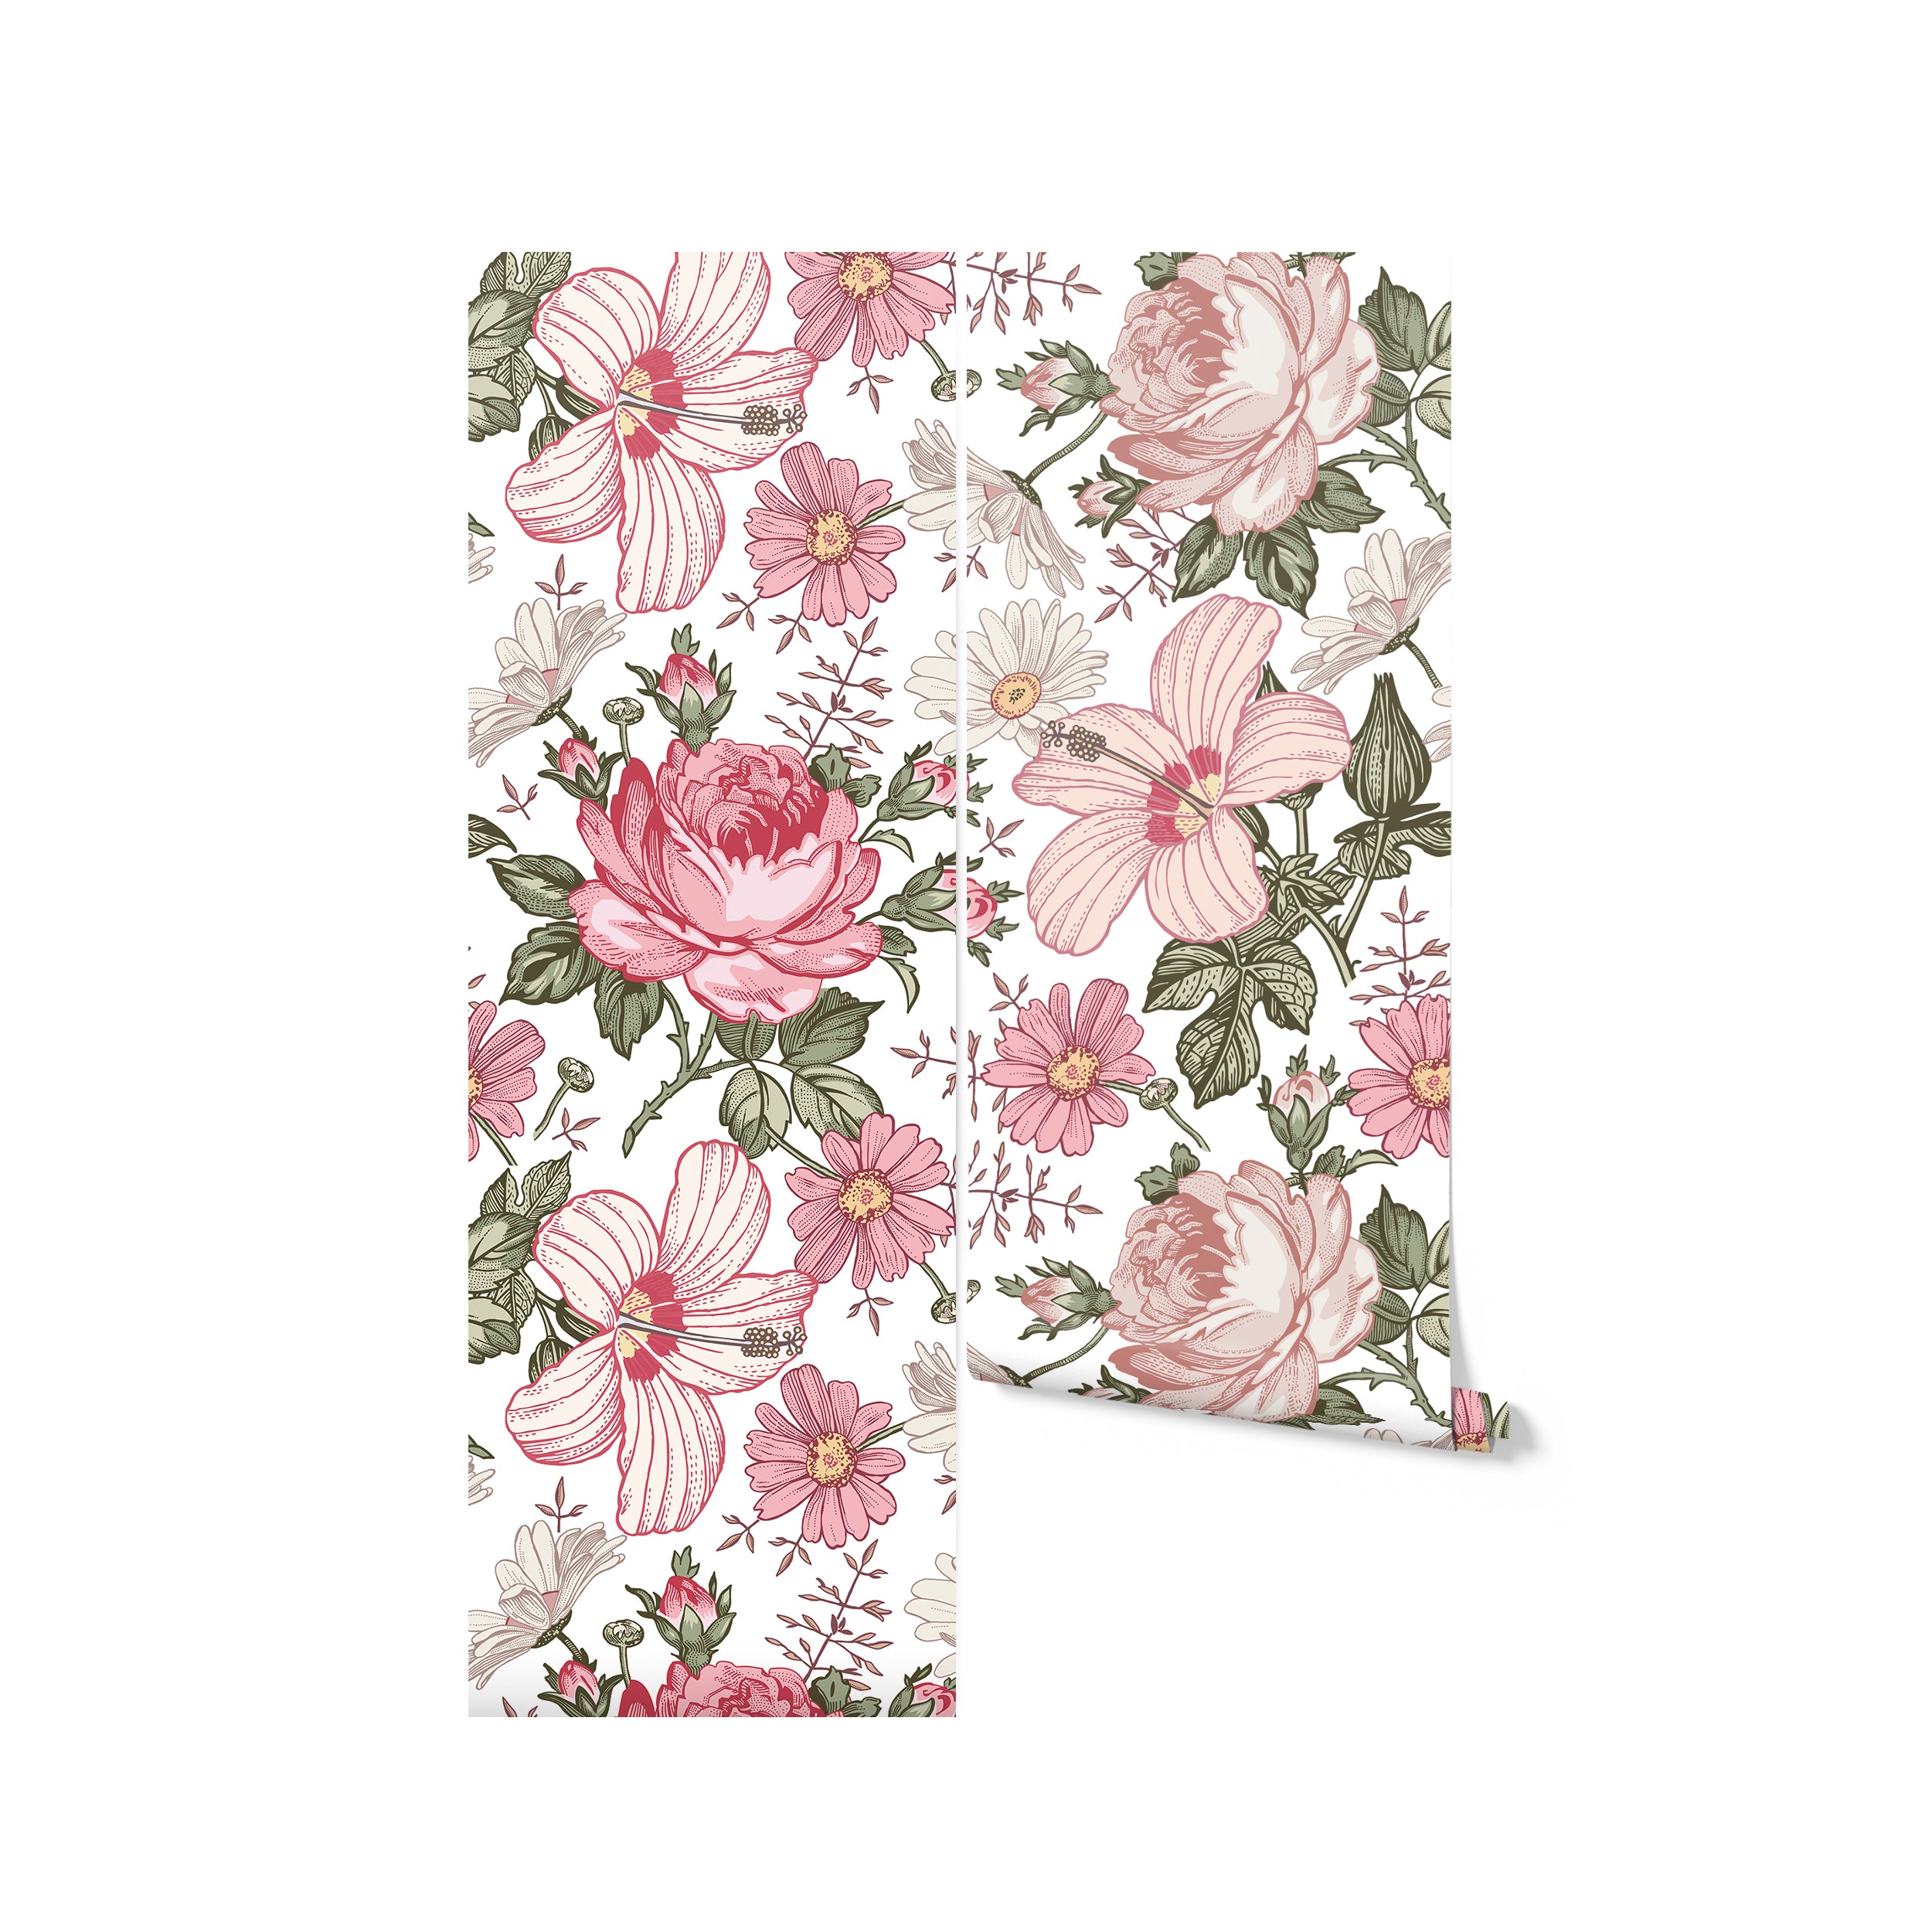 Berry Pink showcased as a rolled product, displaying the beautiful detail and color of the flower prints that offer a fresh, spring-like ambiance to any room.